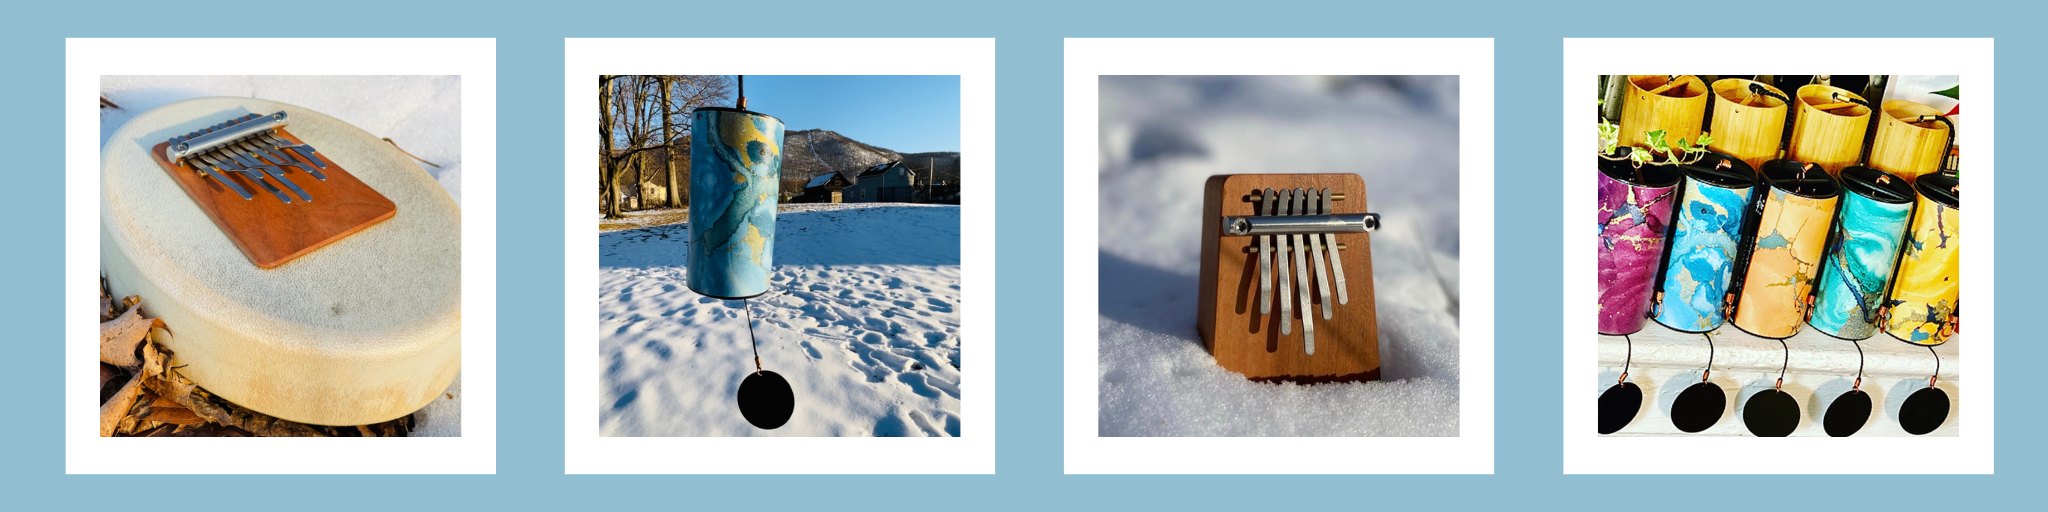 Gift Ideas of Instruments in Snow